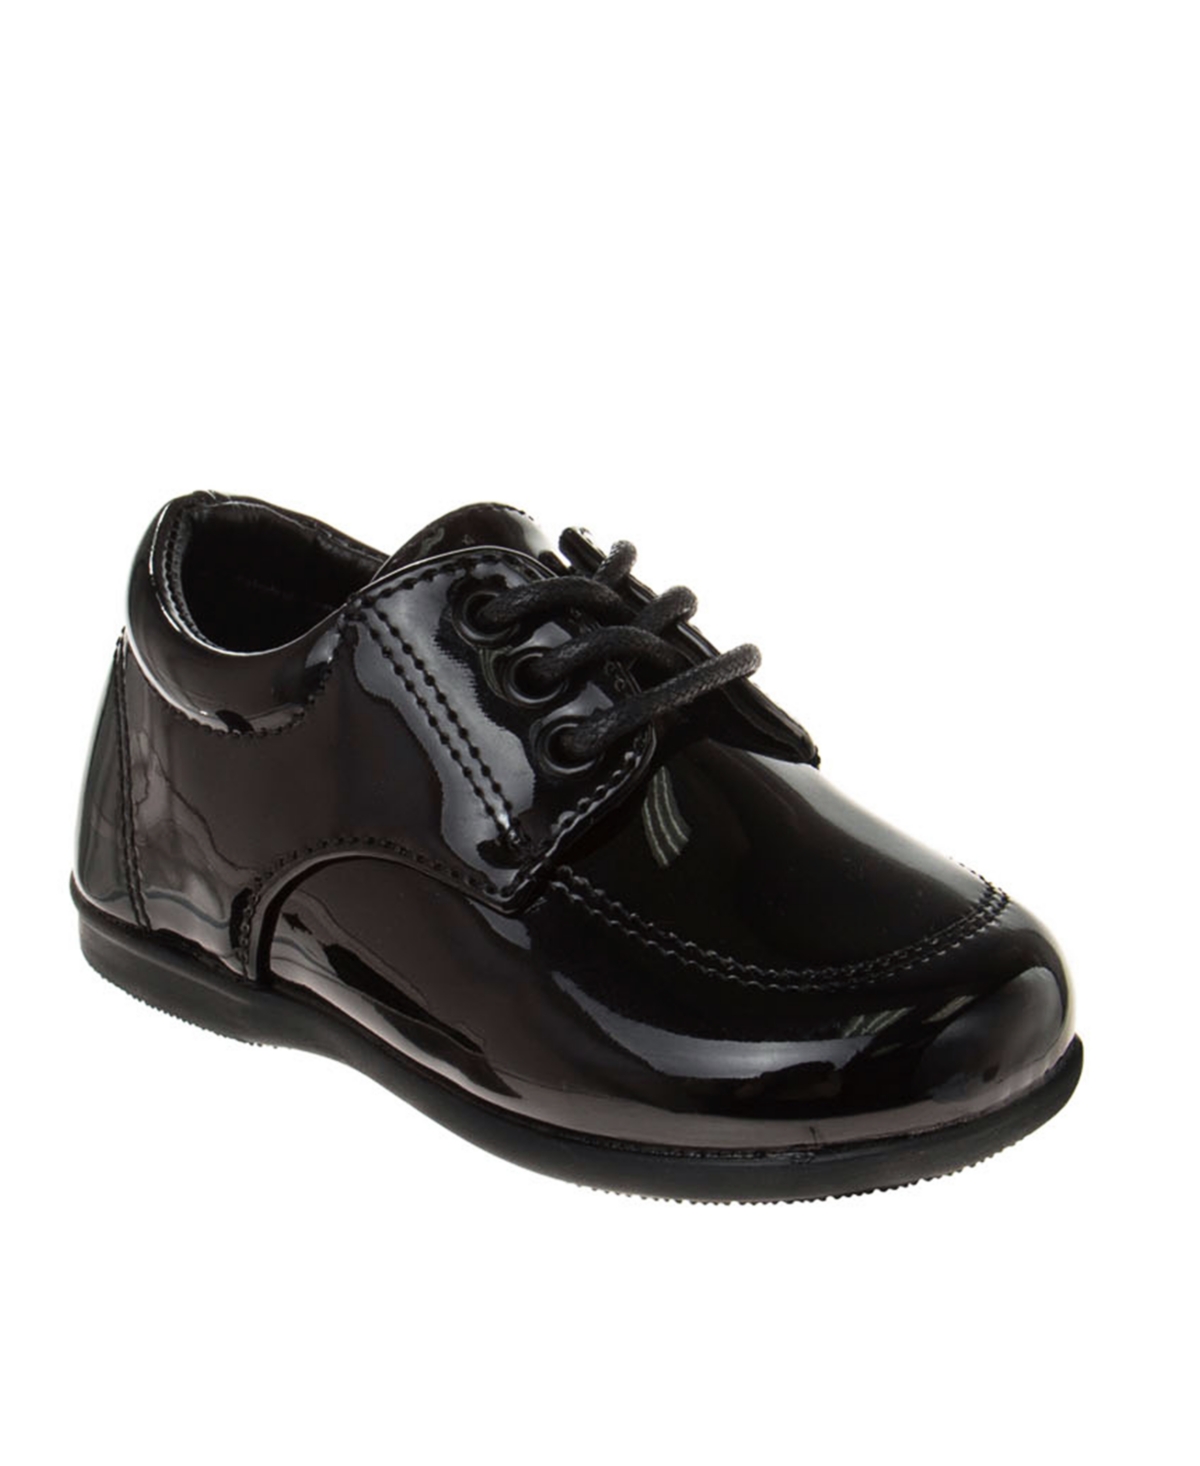 JOSMO TODDLER BOYS LACE UP DRESS SHOES